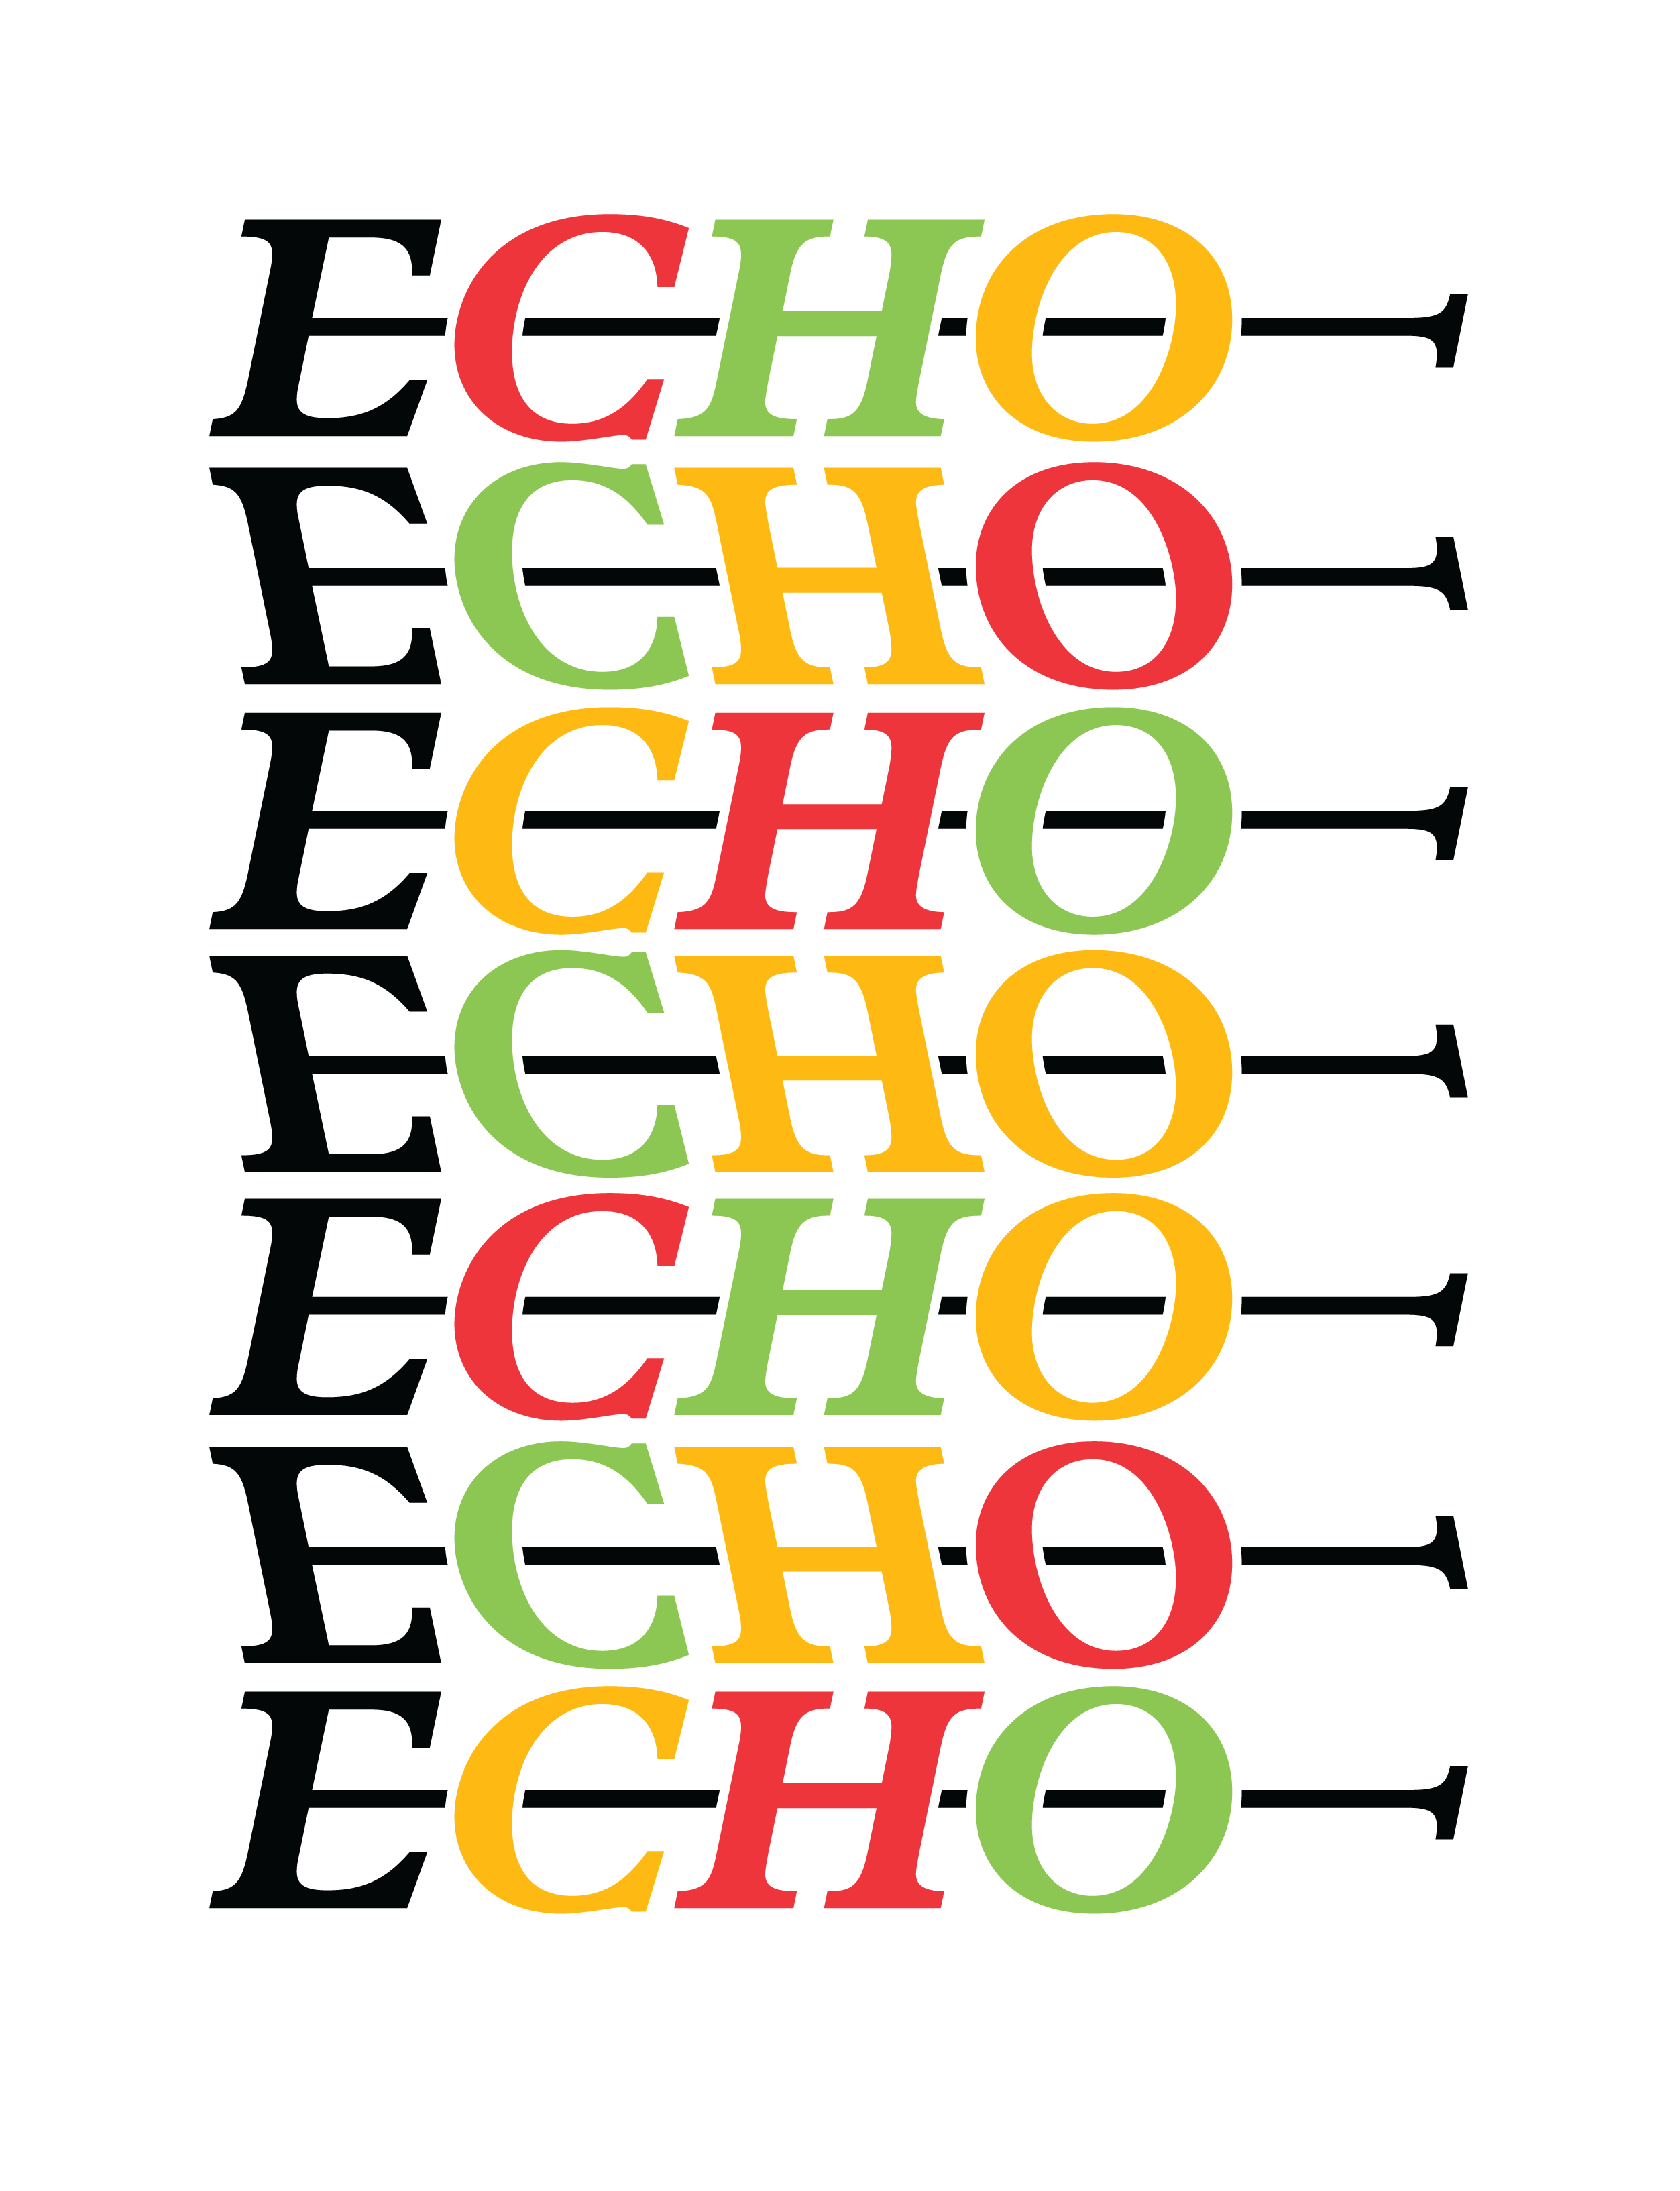 The word echo typographically designed to mimic a set of shish kebabs